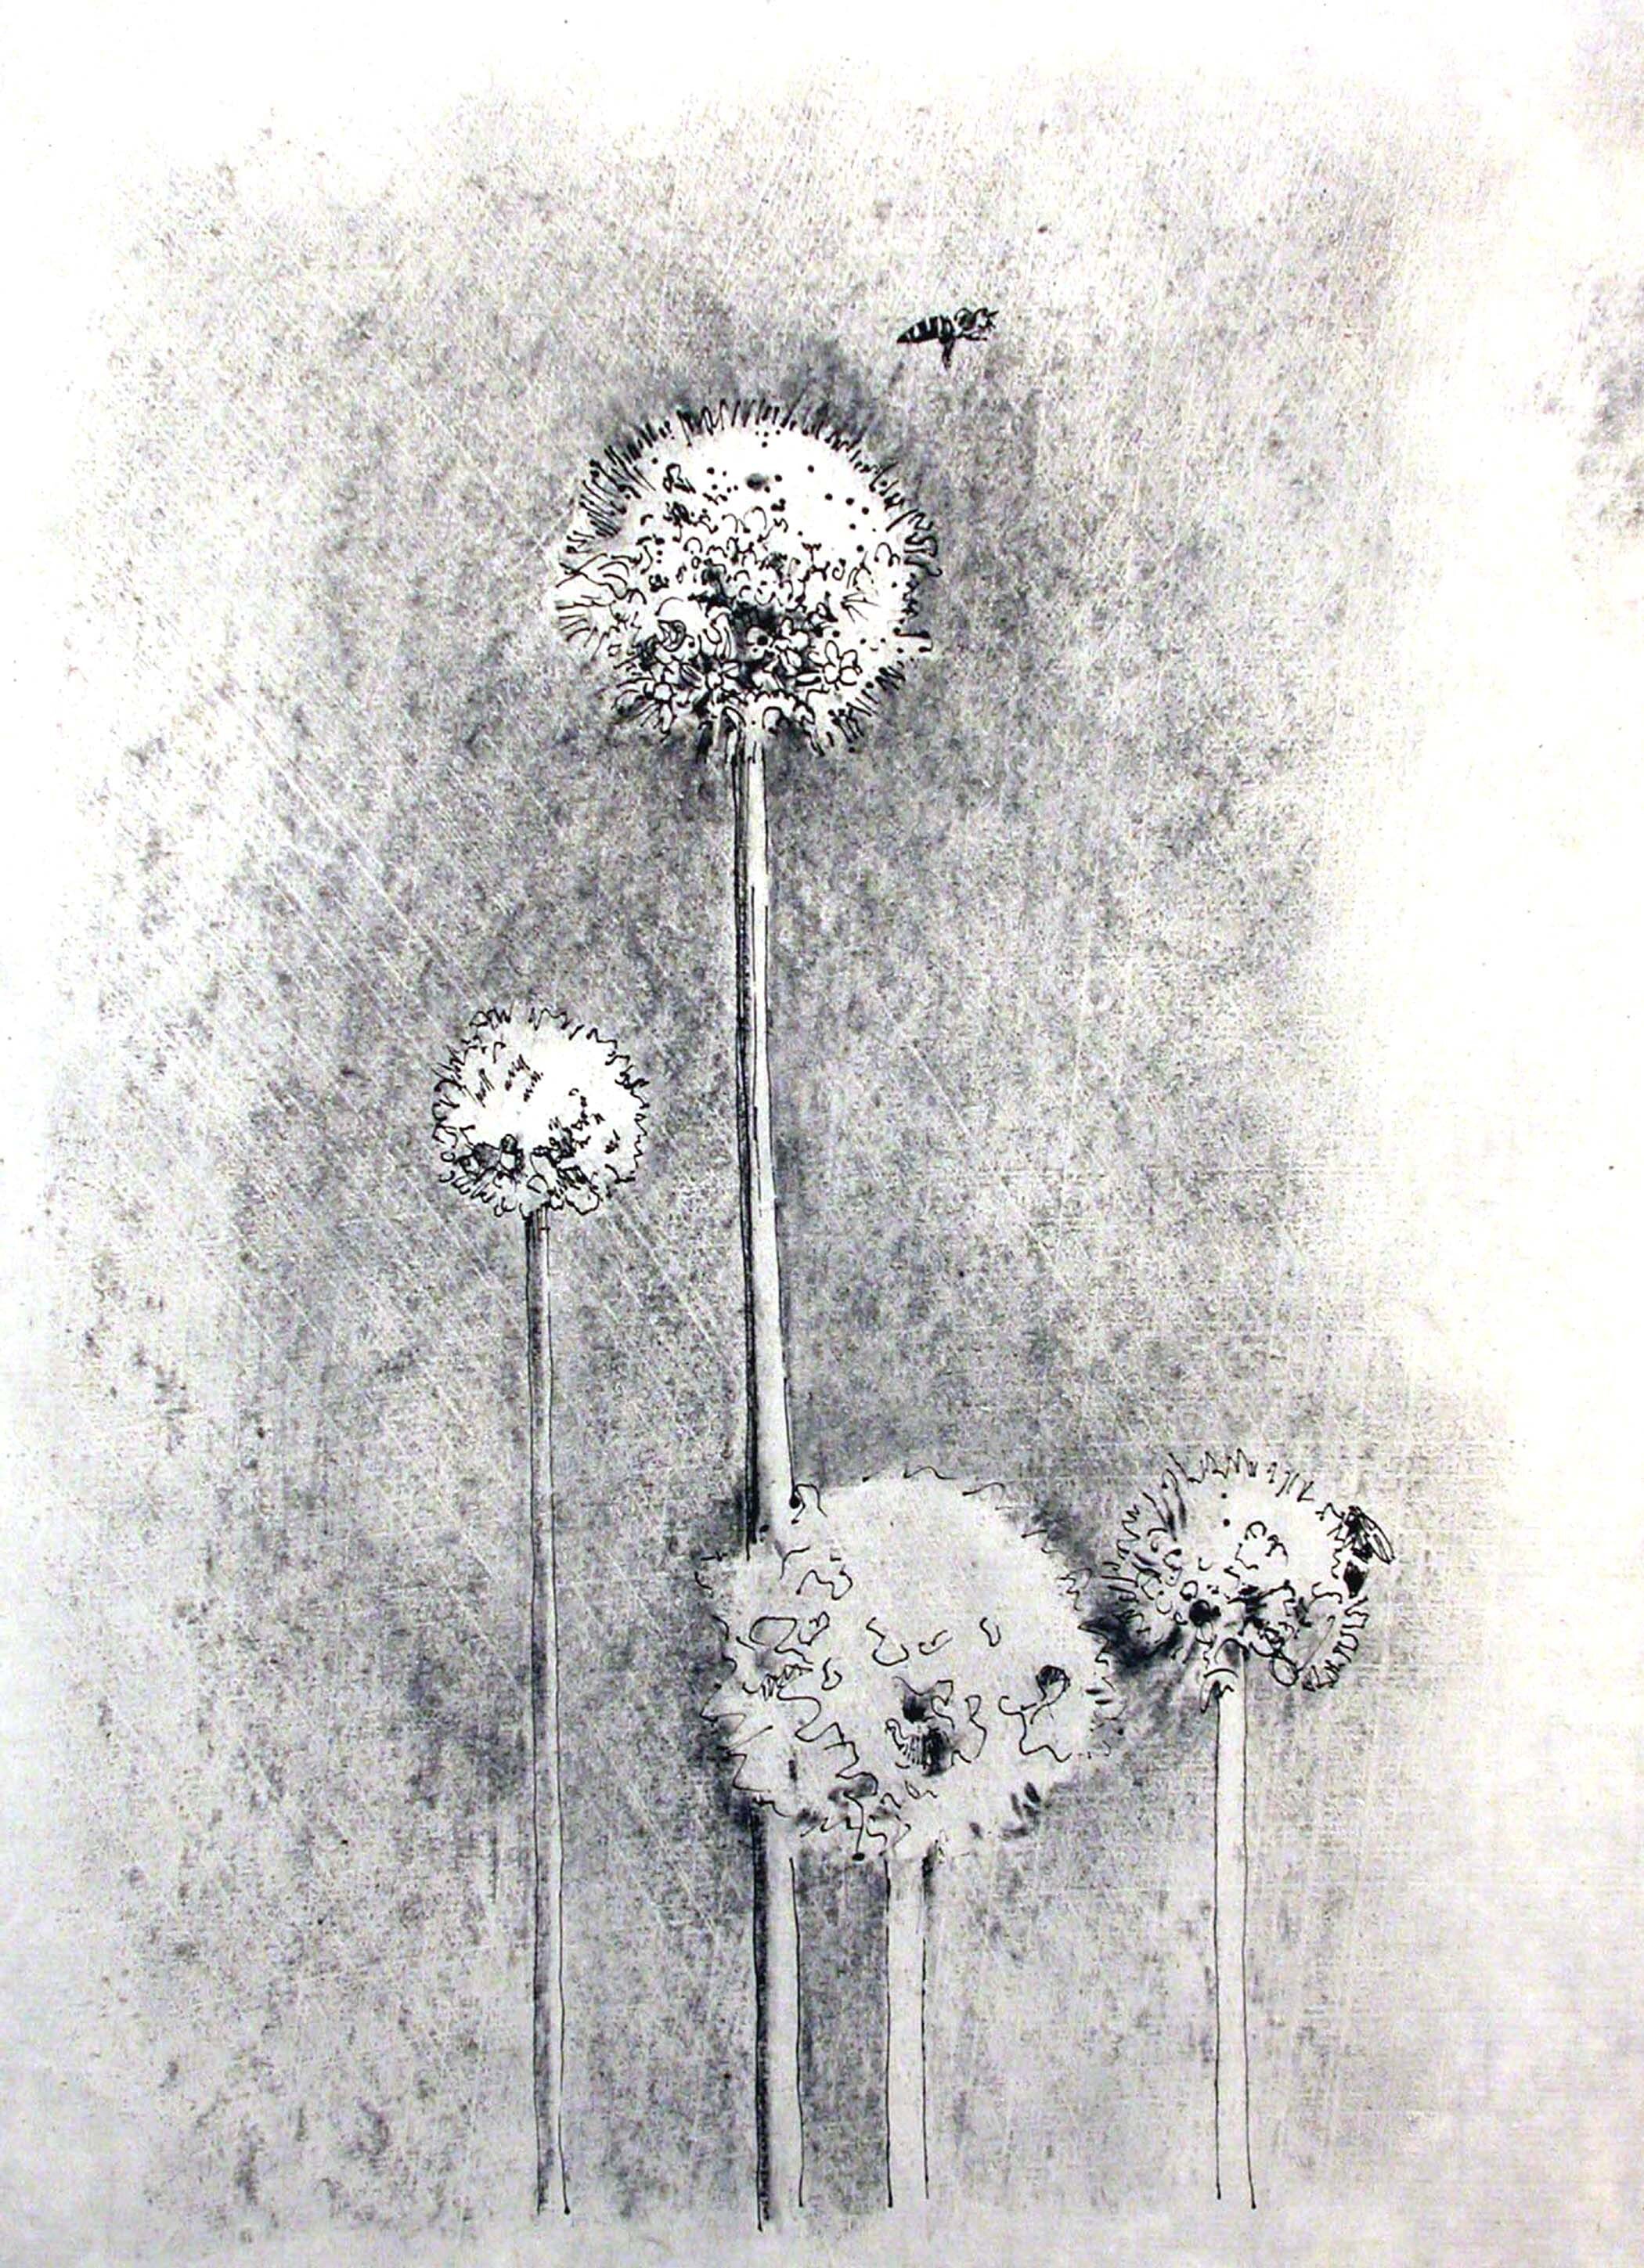   Bee to Pom   graphite and ink  8.5 “ x 11” 2005 